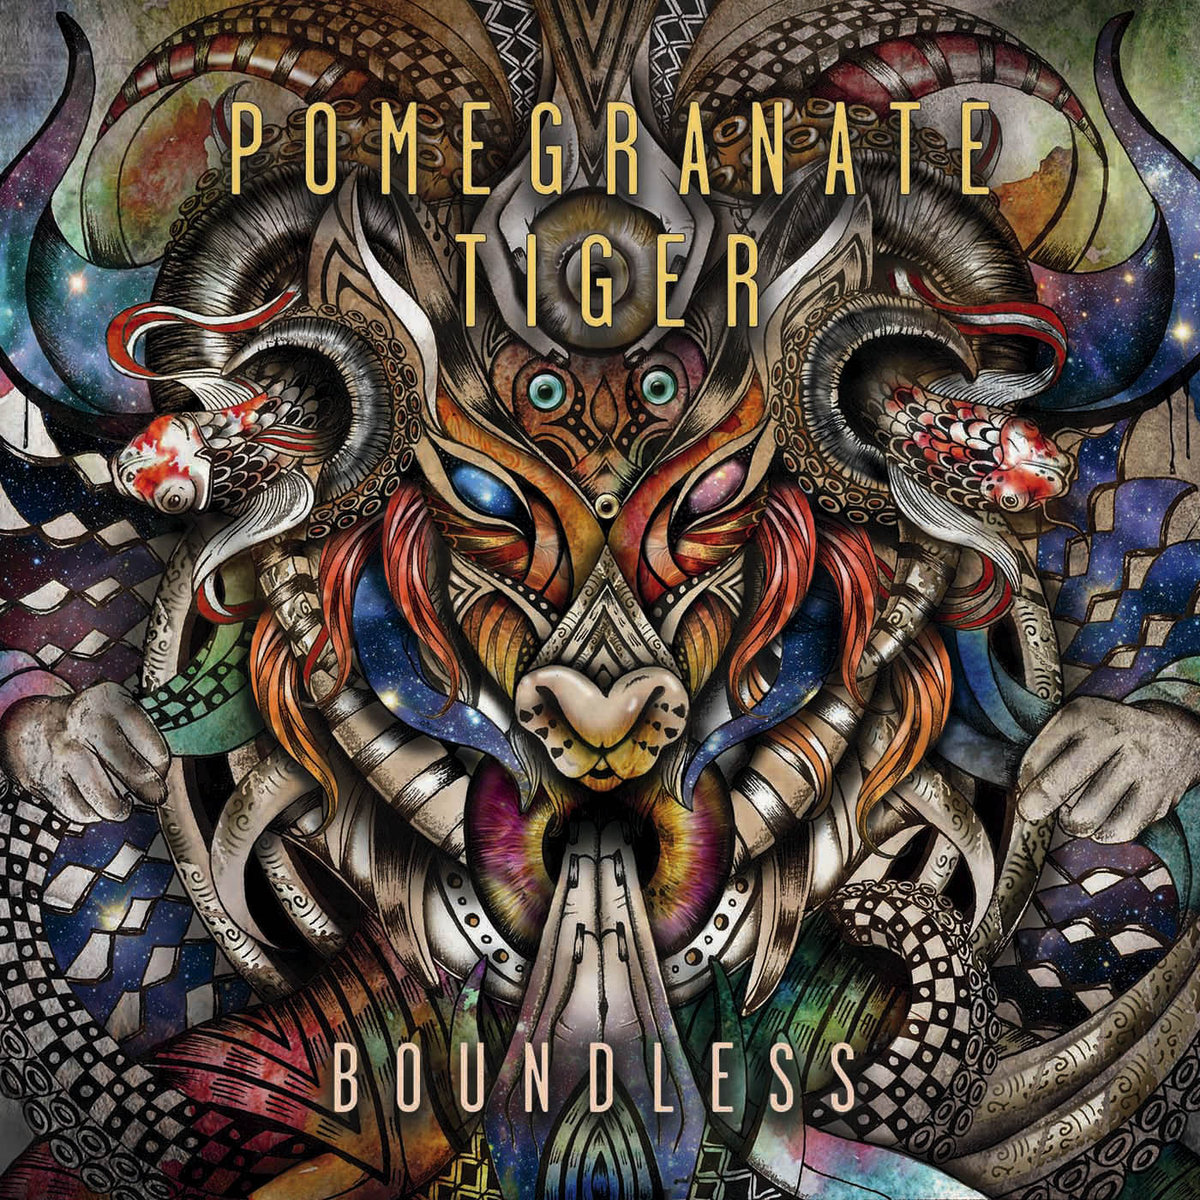 http://www.metalmusicarchives.com/images/covers/pomegranate-tiger-boundless-20170924073118.jpg